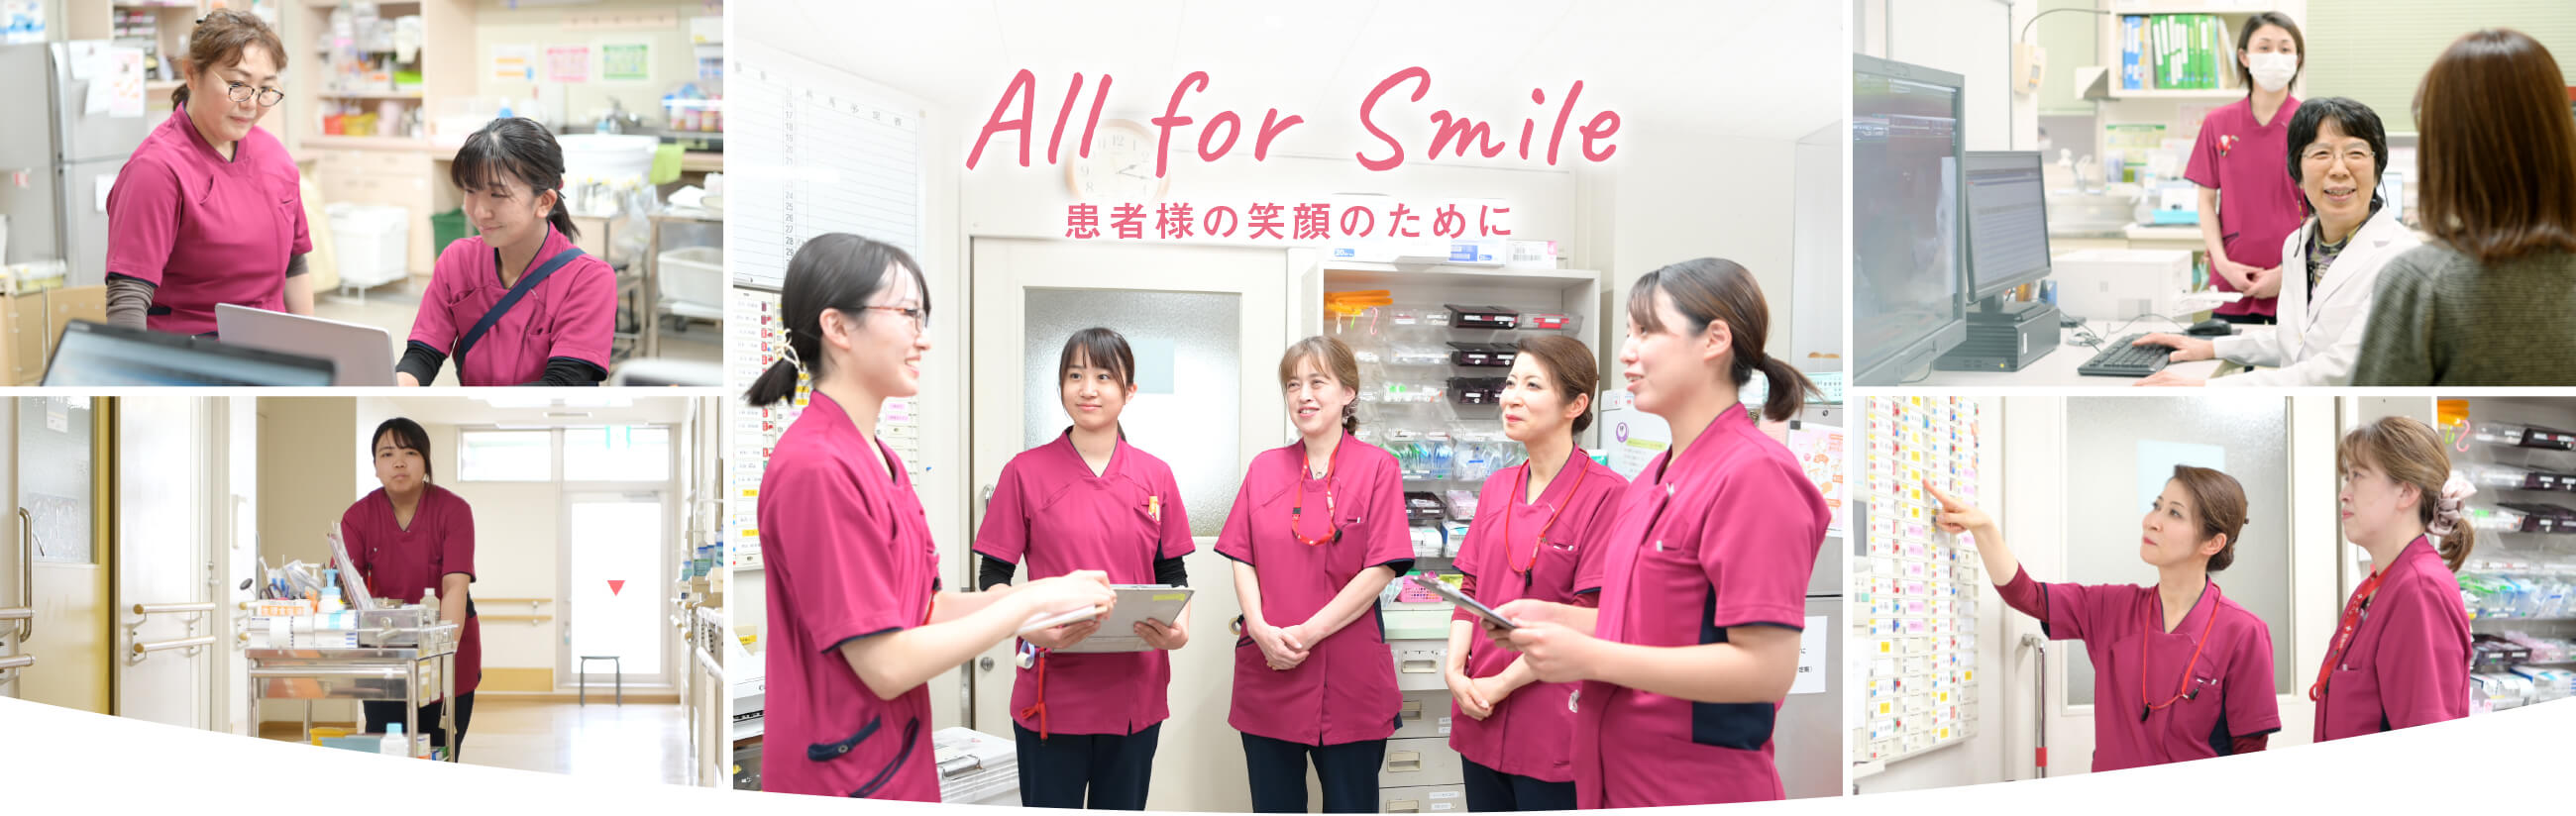 All for Smile　患者様の笑顔のために